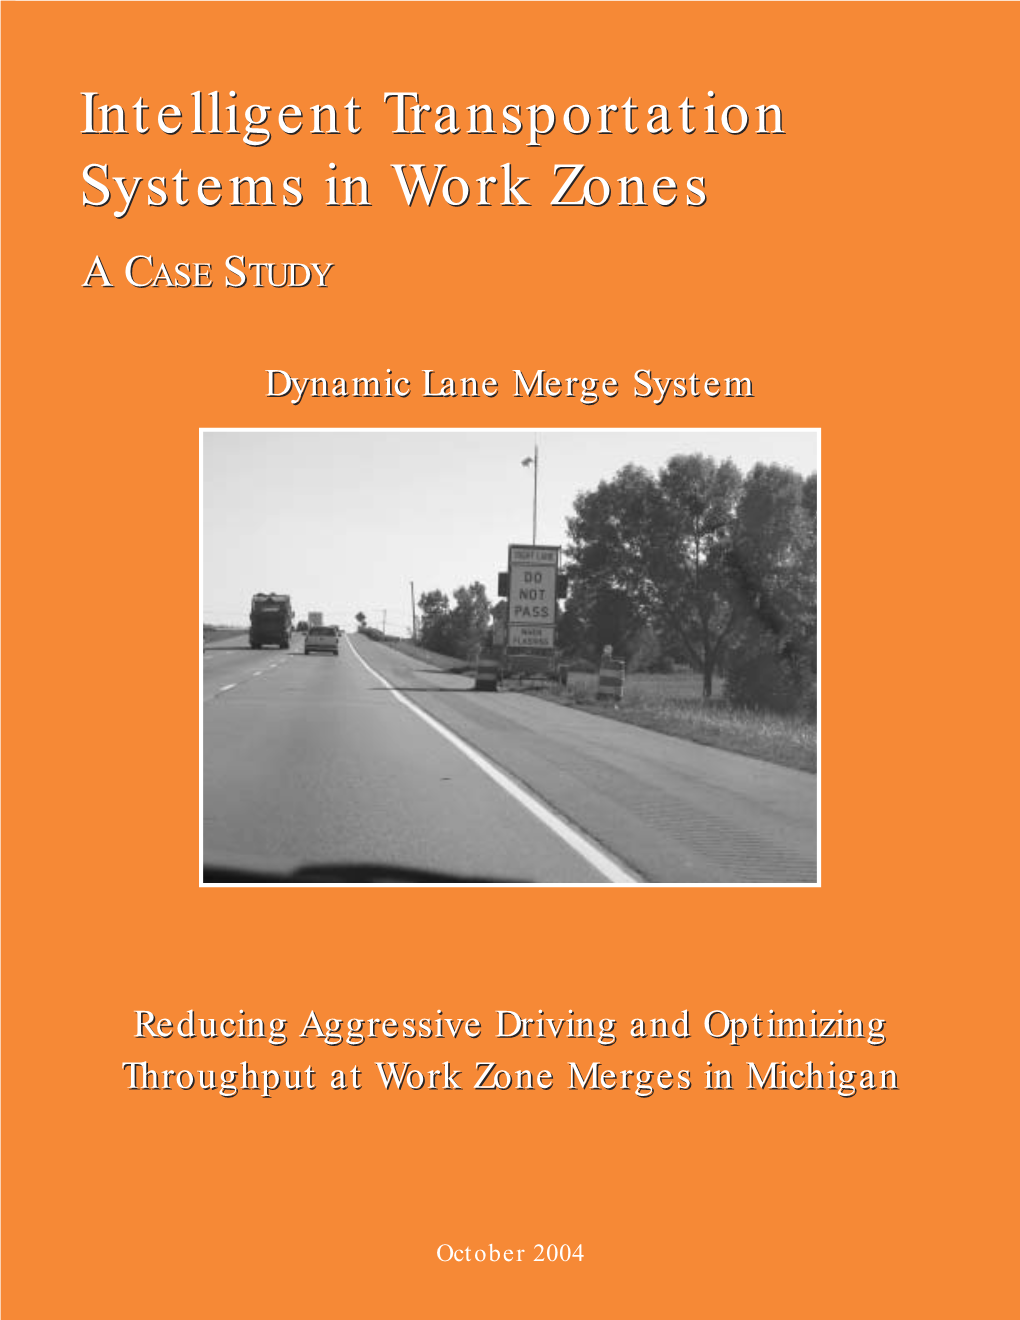 Dynamic Lane Merge ITS Application on I-94, and Were Also Involved with Other Recent Deployments of the System